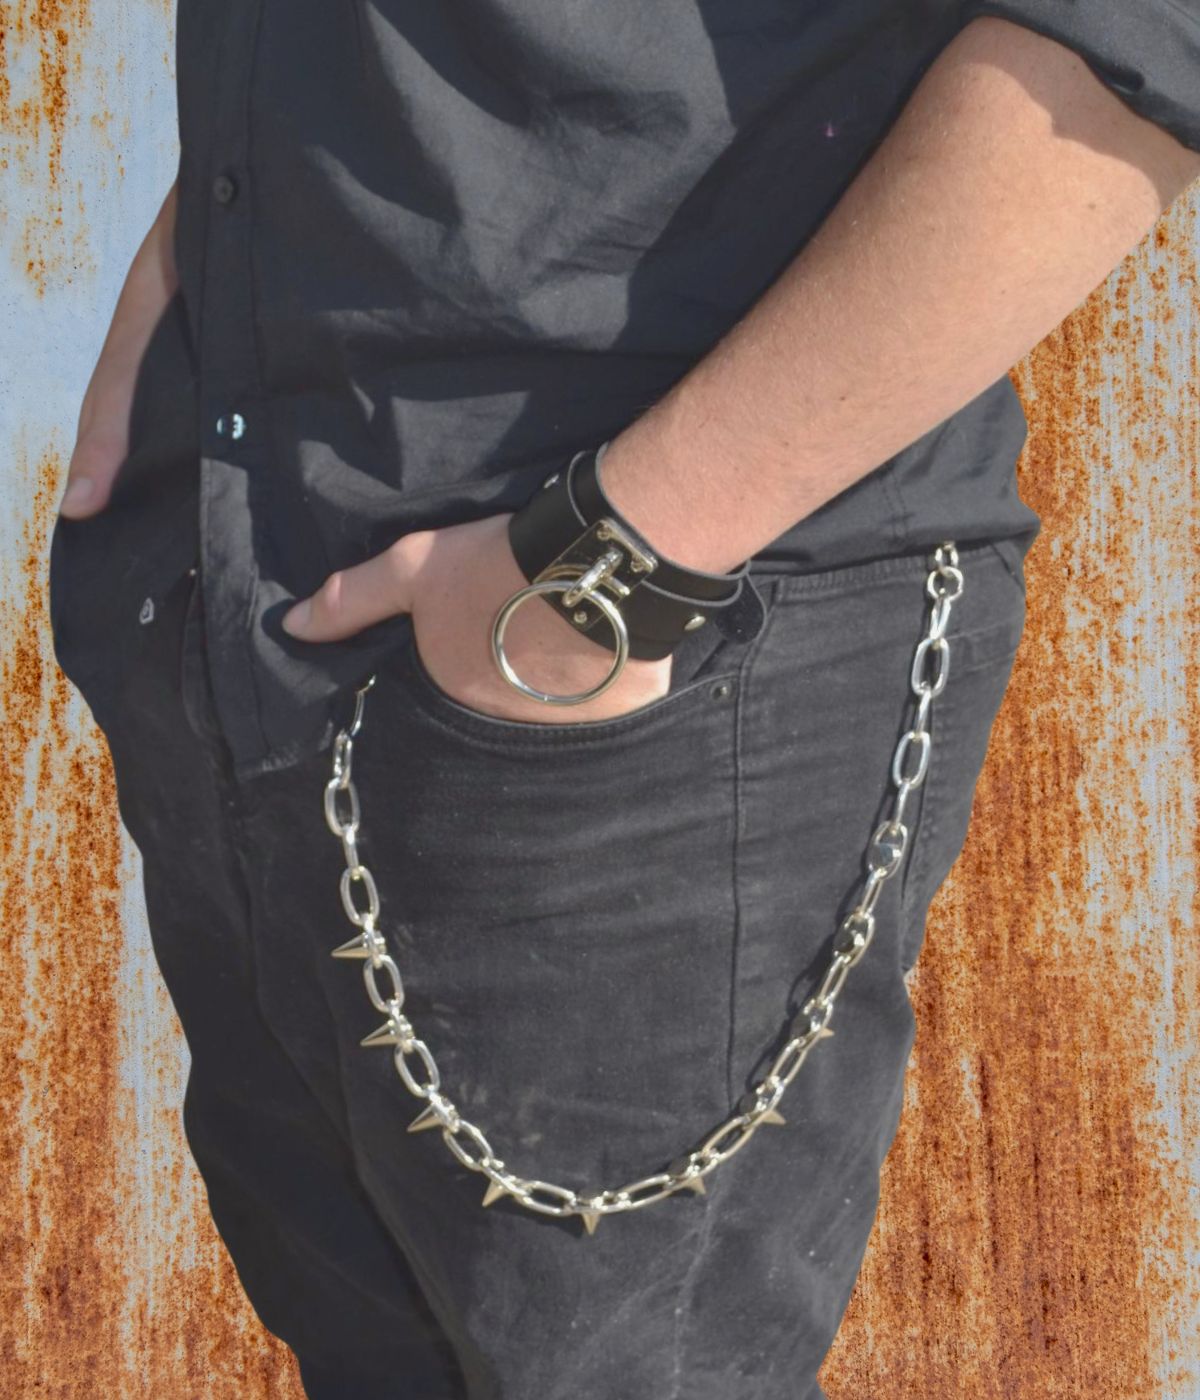 Pant Chains